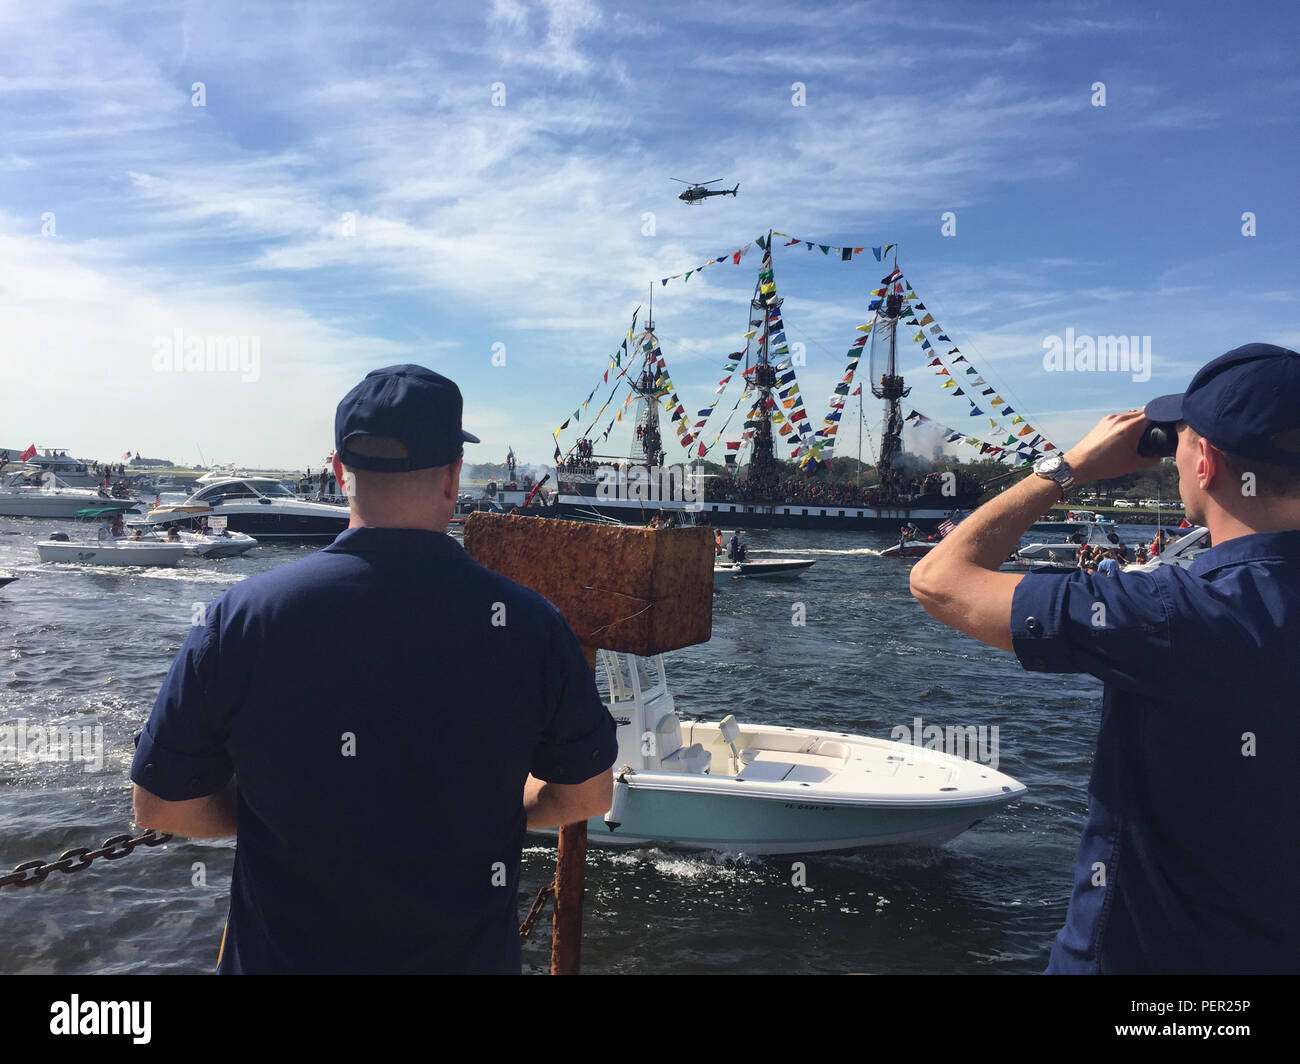 Capt. Gregory Case, commander Sector St. Petersburg, Fla., and Lt. Christopher Rosen, Sector St. Petersburg command center chief, watch over the 2016 Jose Gasparilla Pirate Invasion in the Port of Tampa, Fla., Saturday, Jan. 30, 2016. The Coast Guard partnered with federal, state and local law enforcement agencies to keep the waterways safe during the parade. (U.S. Coast Guard photo by Chief Petty Officer David Schuhlein) Stock Photo